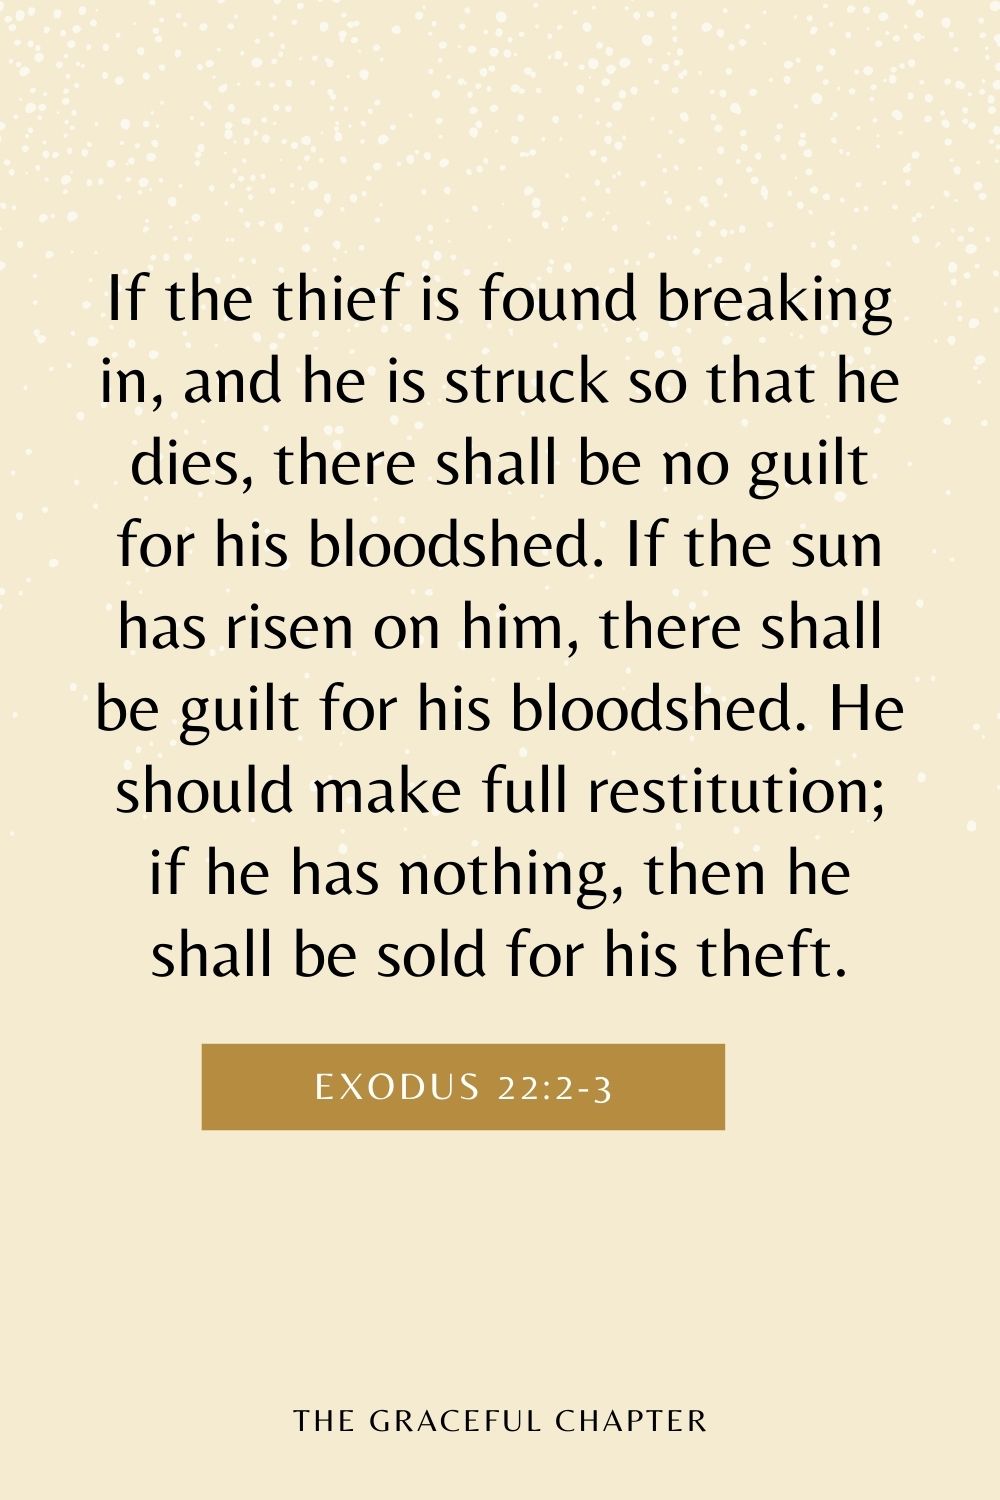 If the thief is found breaking in, and he is struck so that he dies, there shall be no guilt for his bloodshed. If the sun has risen on him, there shall be guilt for his bloodshed. He should make full restitution; if he has nothing, then he shall be sold for his theft. Exodus 22:2-3